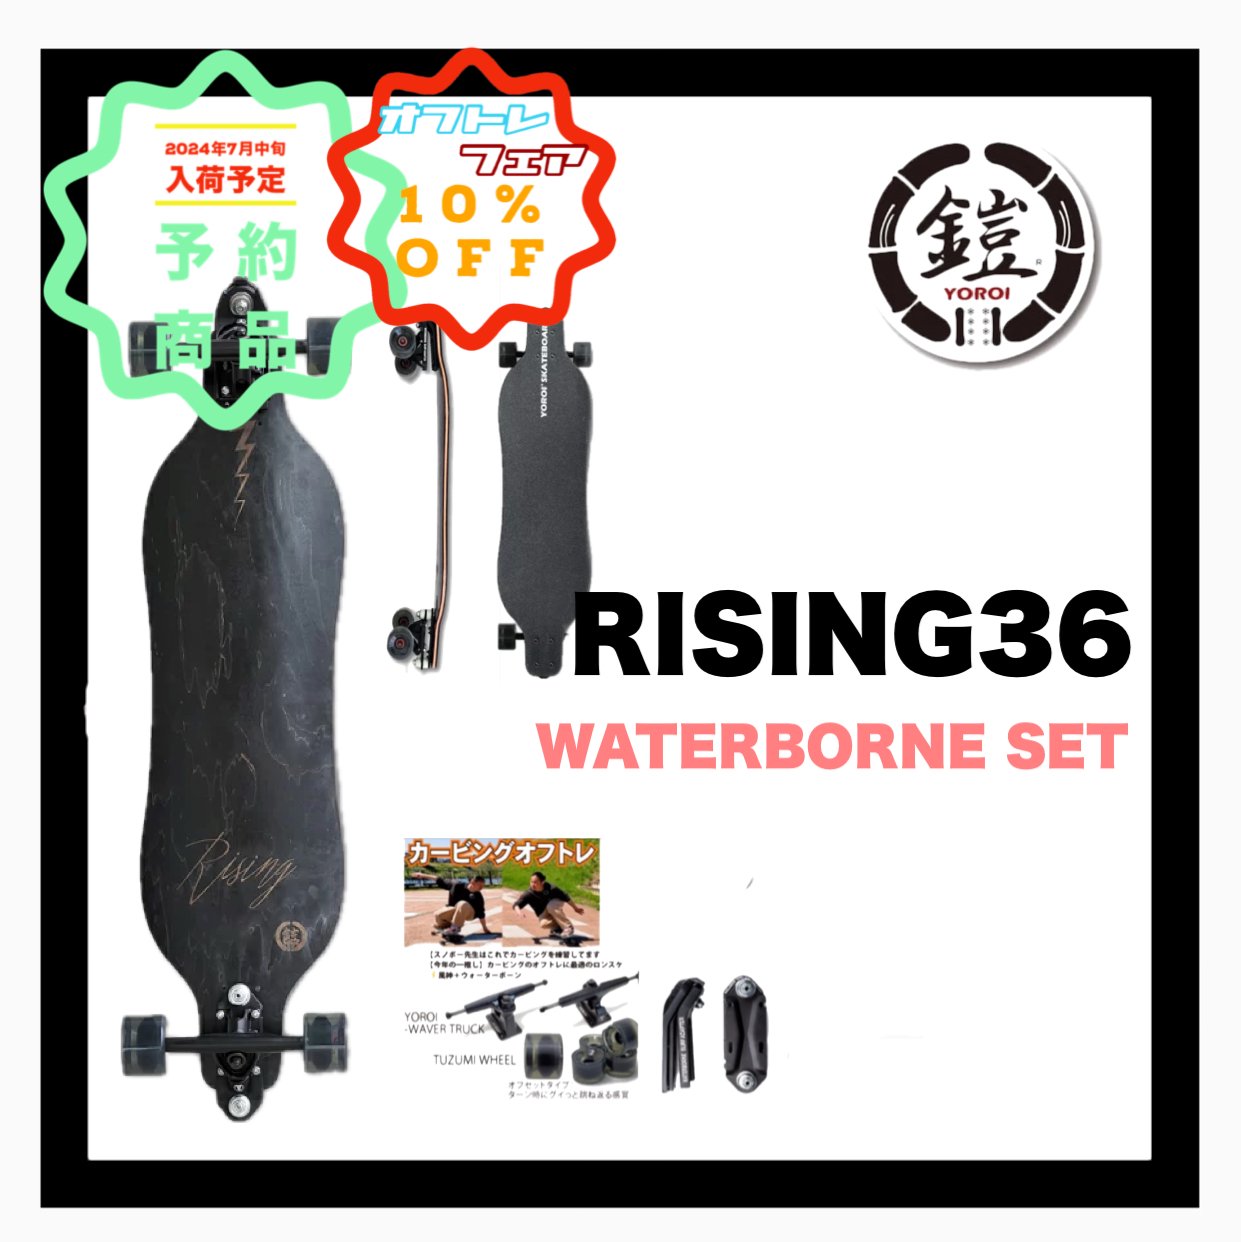 <img class='new_mark_img1' src='https://img.shop-pro.jp/img/new/icons14.gif' style='border:none;display:inline;margin:0px;padding:0px;width:auto;' />YOROI  SKATE BOARD YOROI SKATEBOARD RISING WATER BORNE FIN SYSTEM 41